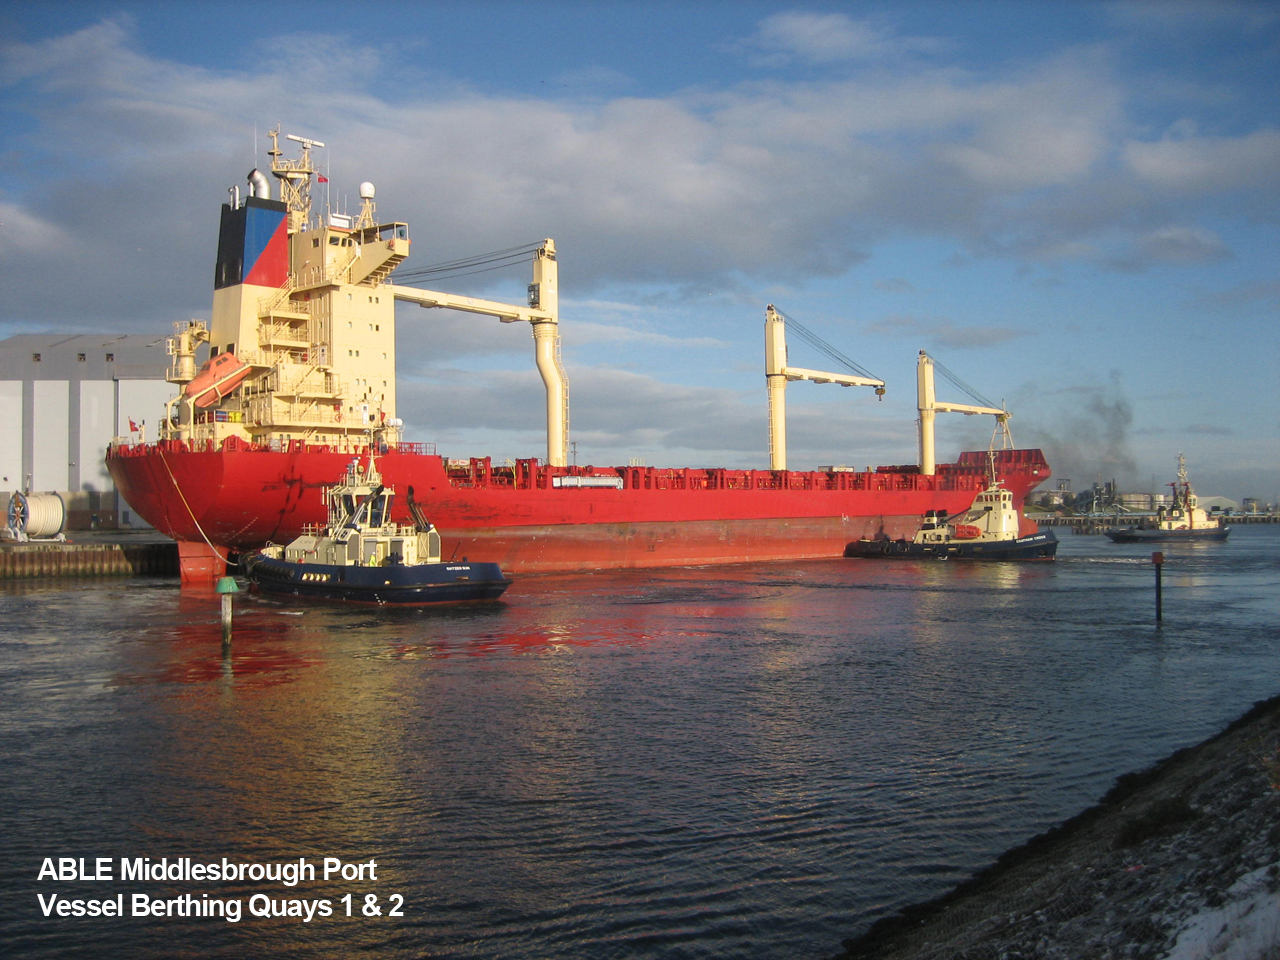 Able Middlesbrough Port Vessel Berthing Quays 1 and 2